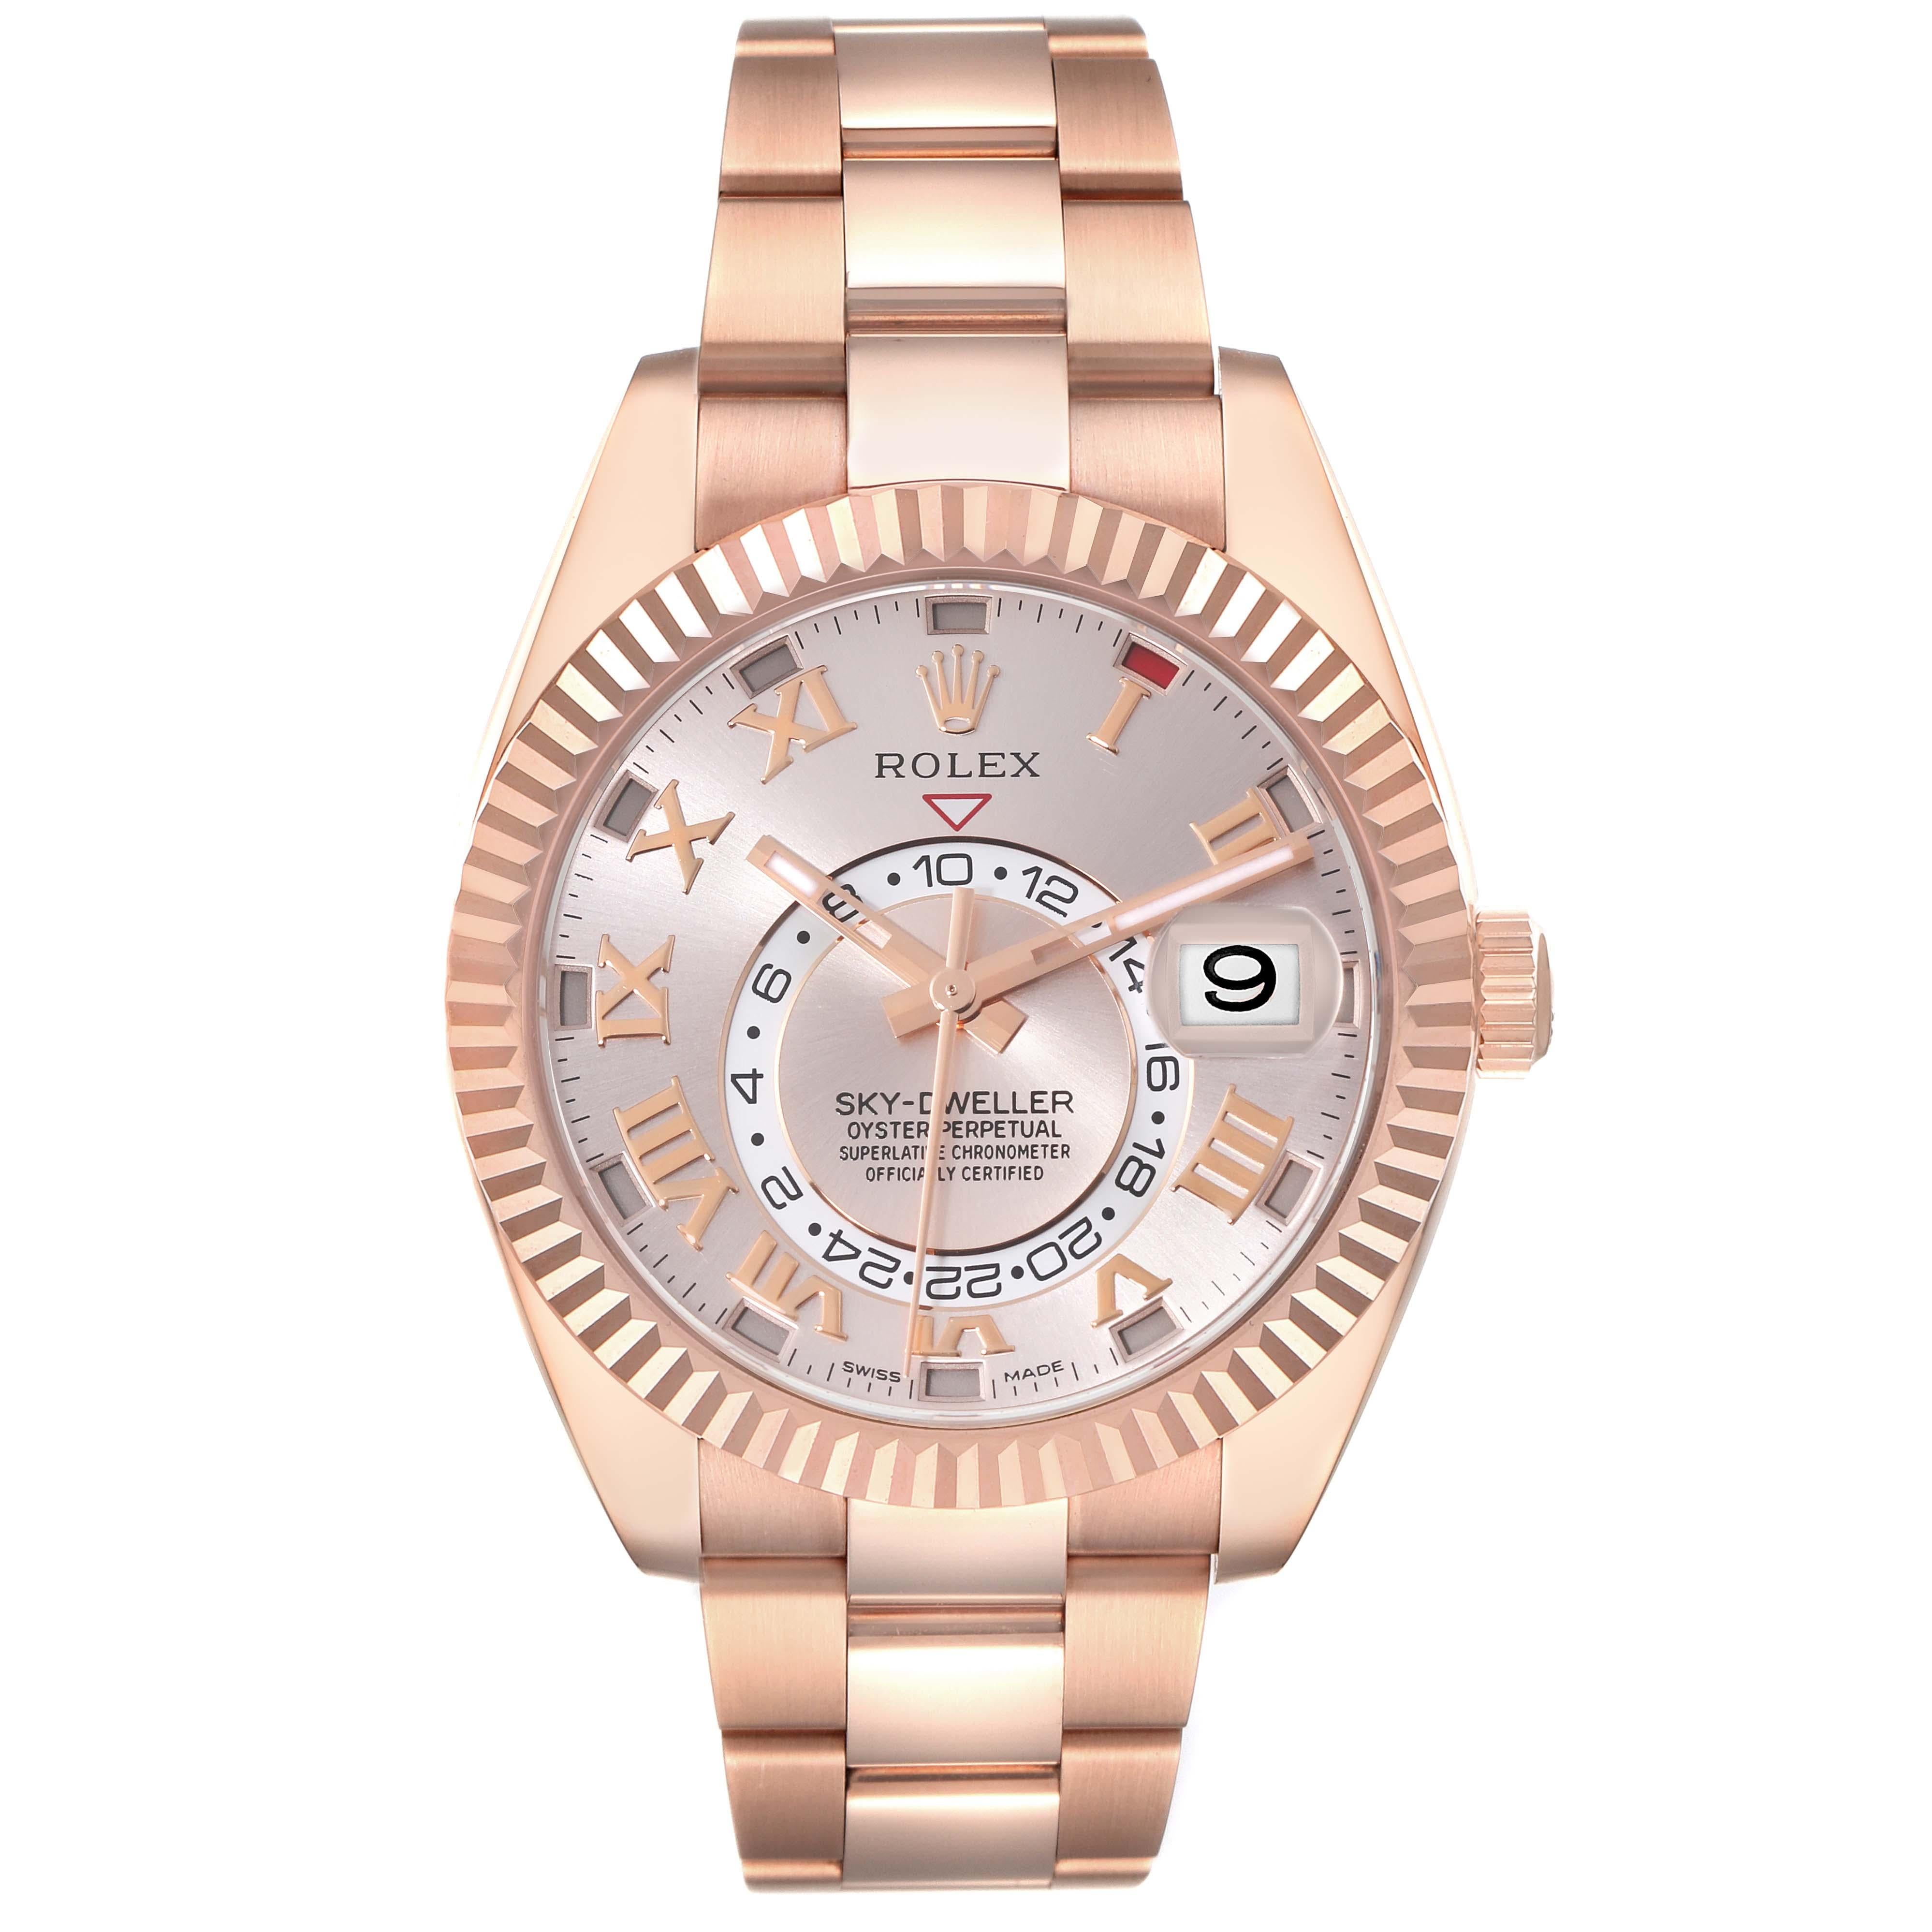 Rolex Sky-Dweller Rose Gold Sundust Dial Mens Watch 326935. Officially certified chronometer self-winding movement. Dual time zones, annual calendar. Paramagnetic blue Parachrom hairspring. High-performance Paraflex shock absorbers. 18k rose gold